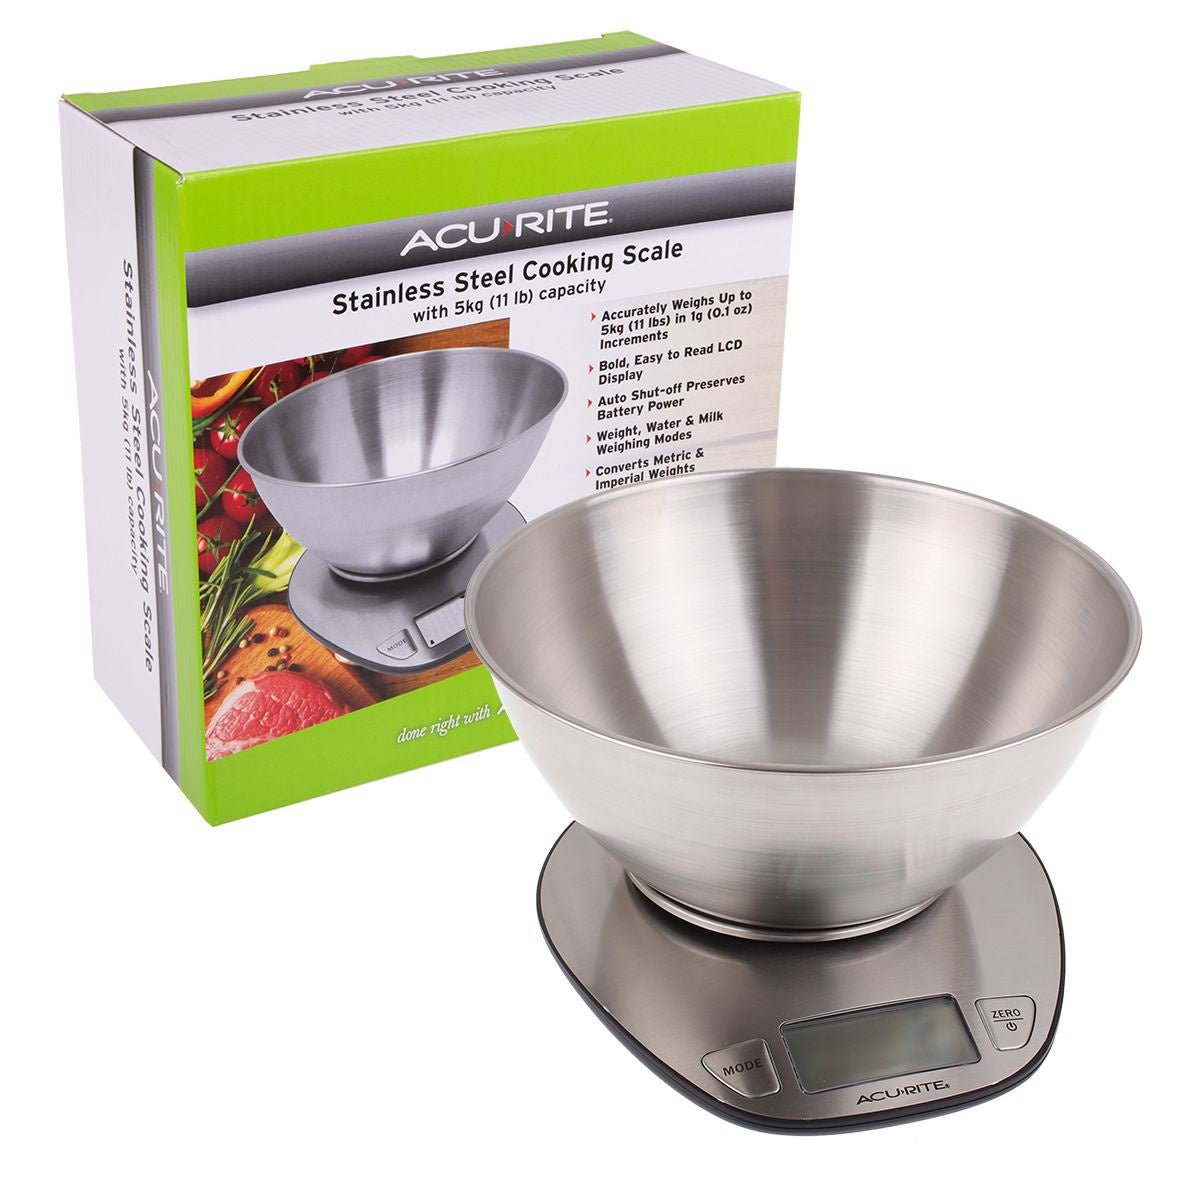 ACURITE Stainless Steel Cooking Scale w/ Bowl 5kg